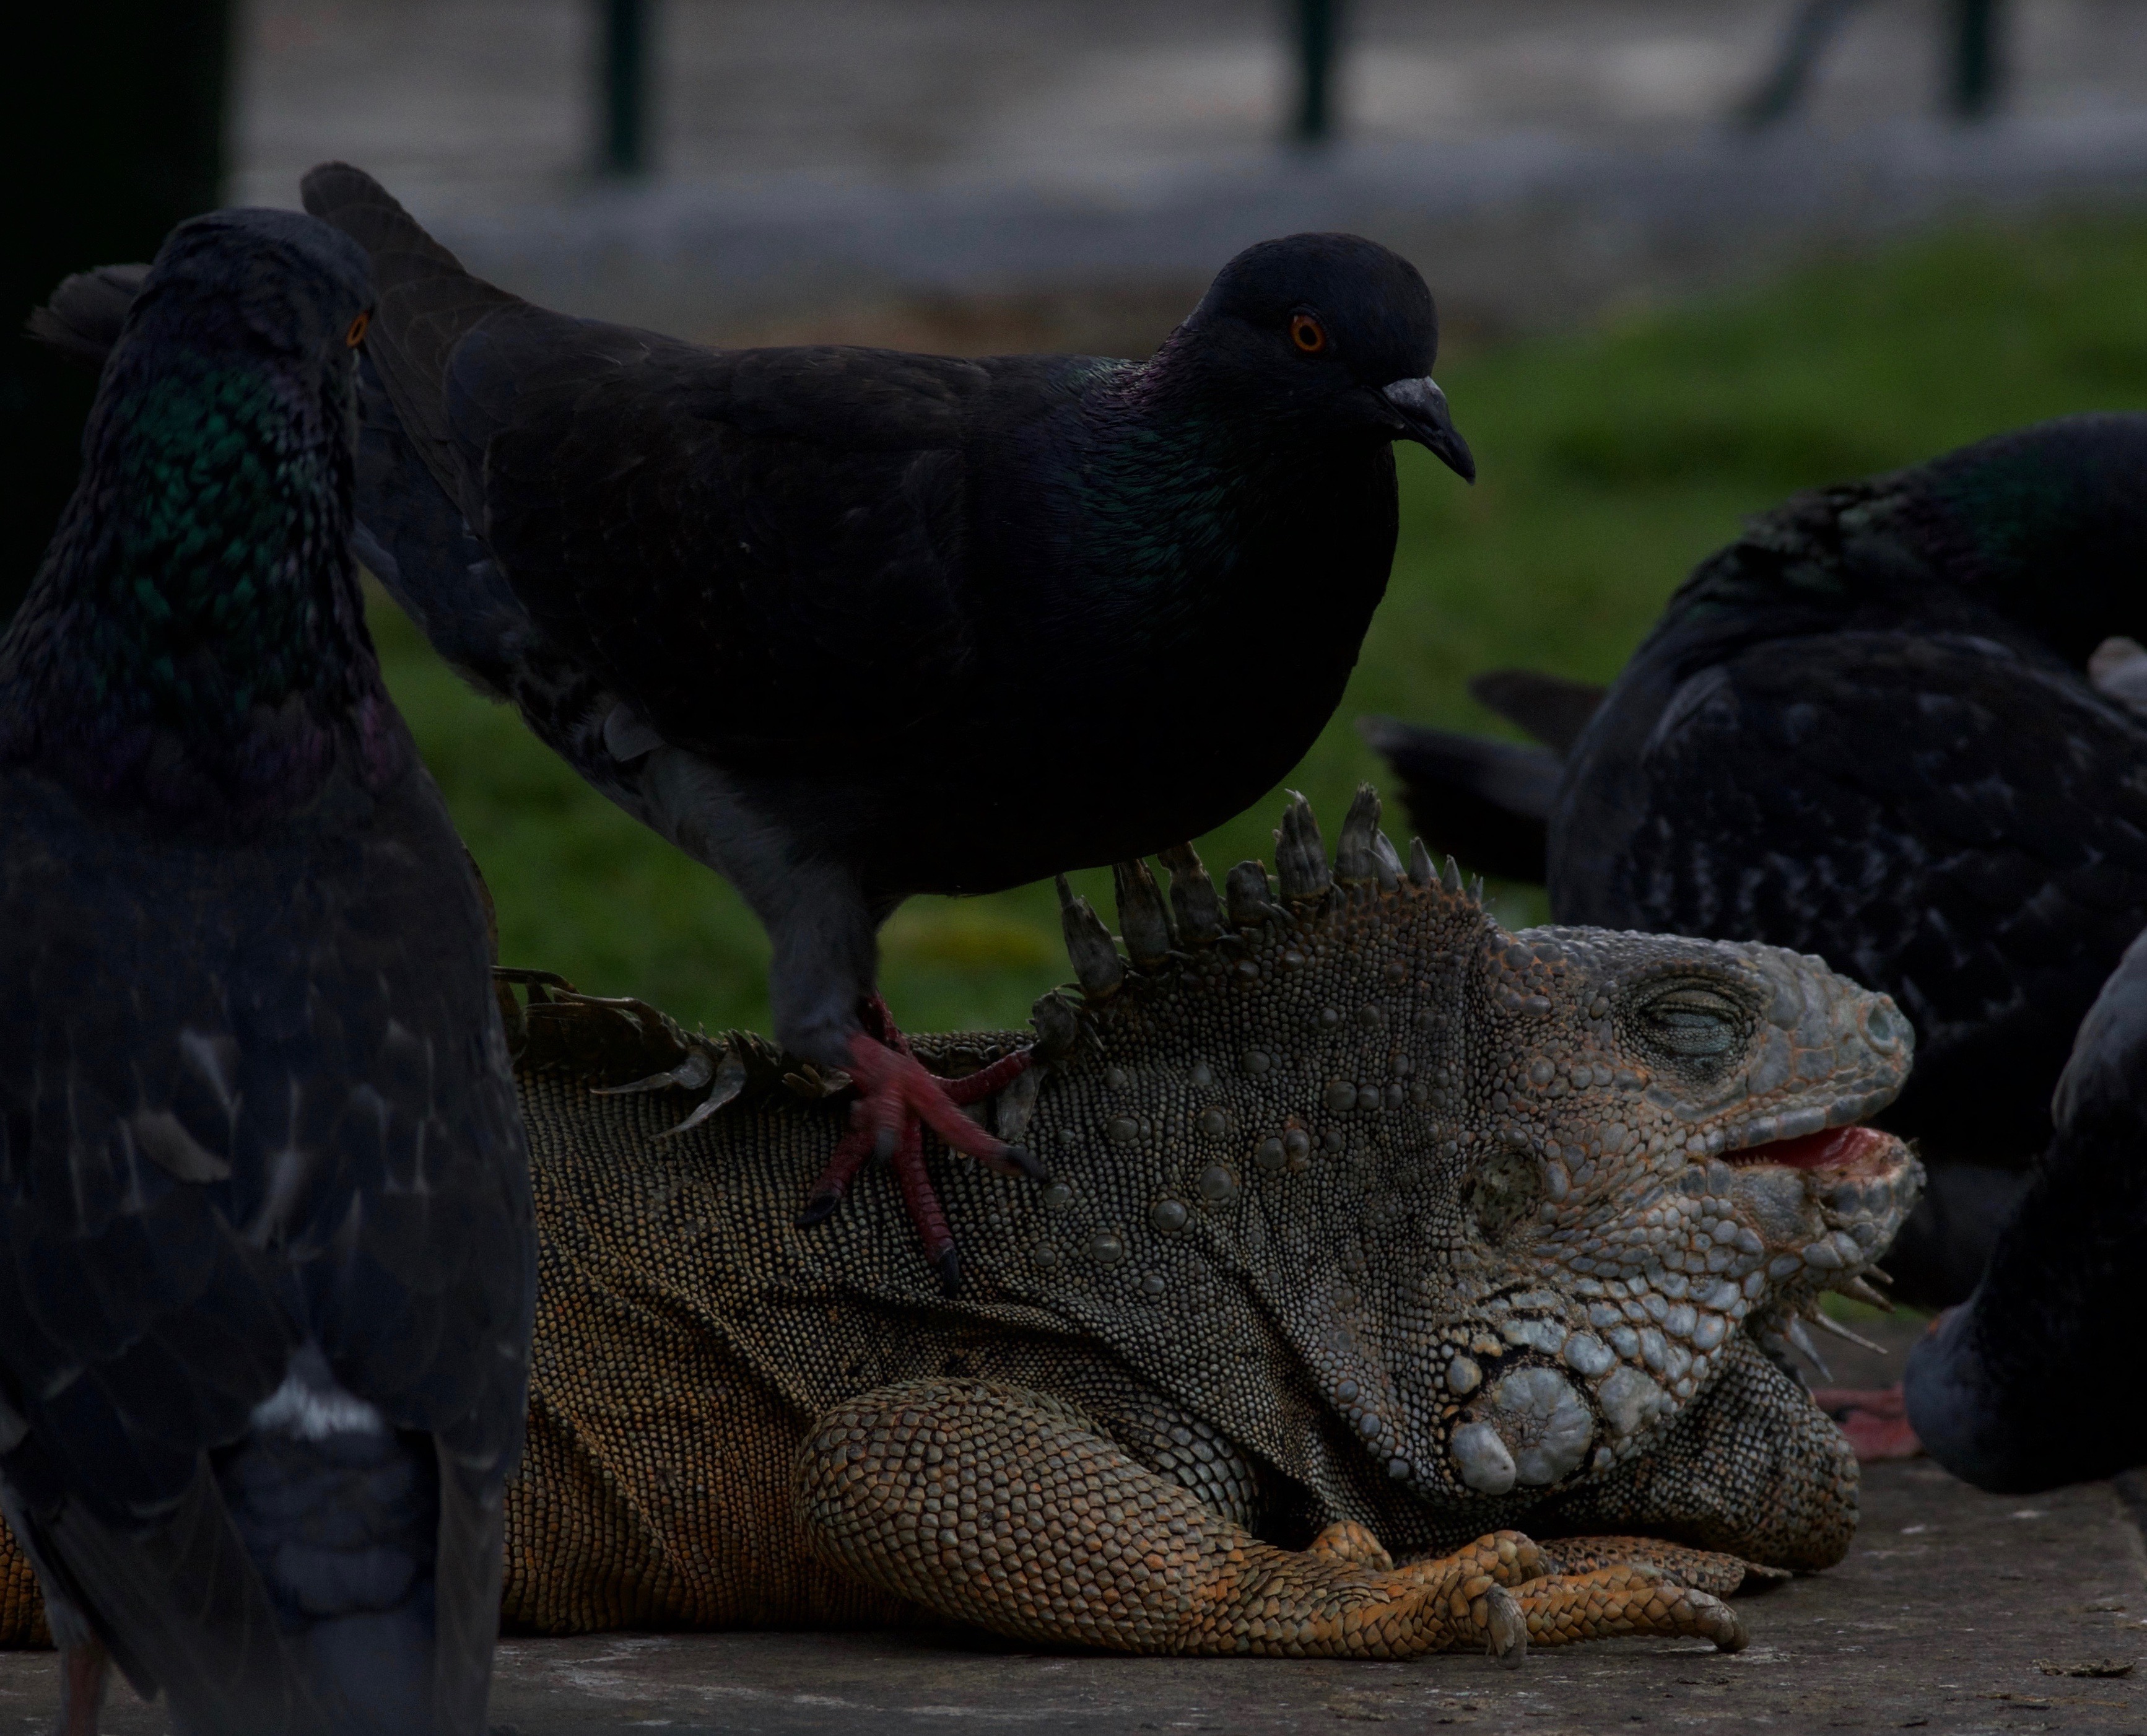 "Iguana Park" in Guayaquil, Ecuador they built the park there but they wouldn't leave and iguanas kept it their home. They lounge in the sun as pigeons walk all over them as if they are getting a massage.